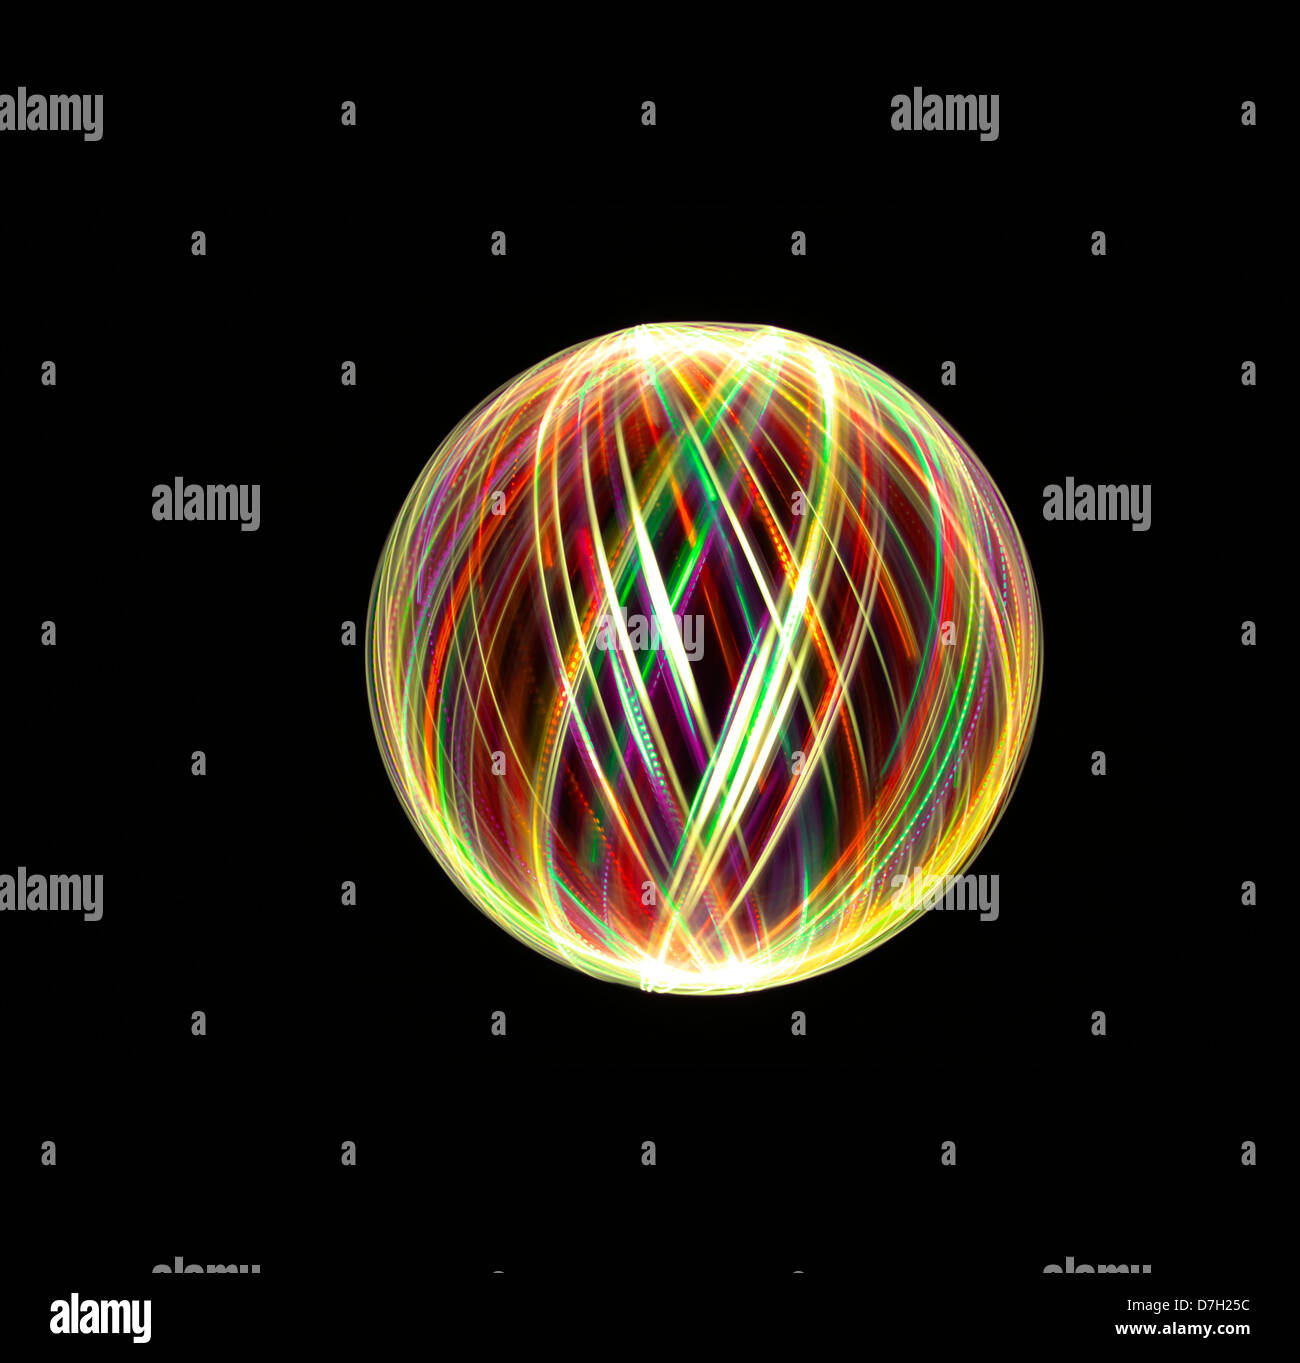 Light Painting Orbs and Spheres Stock Photo